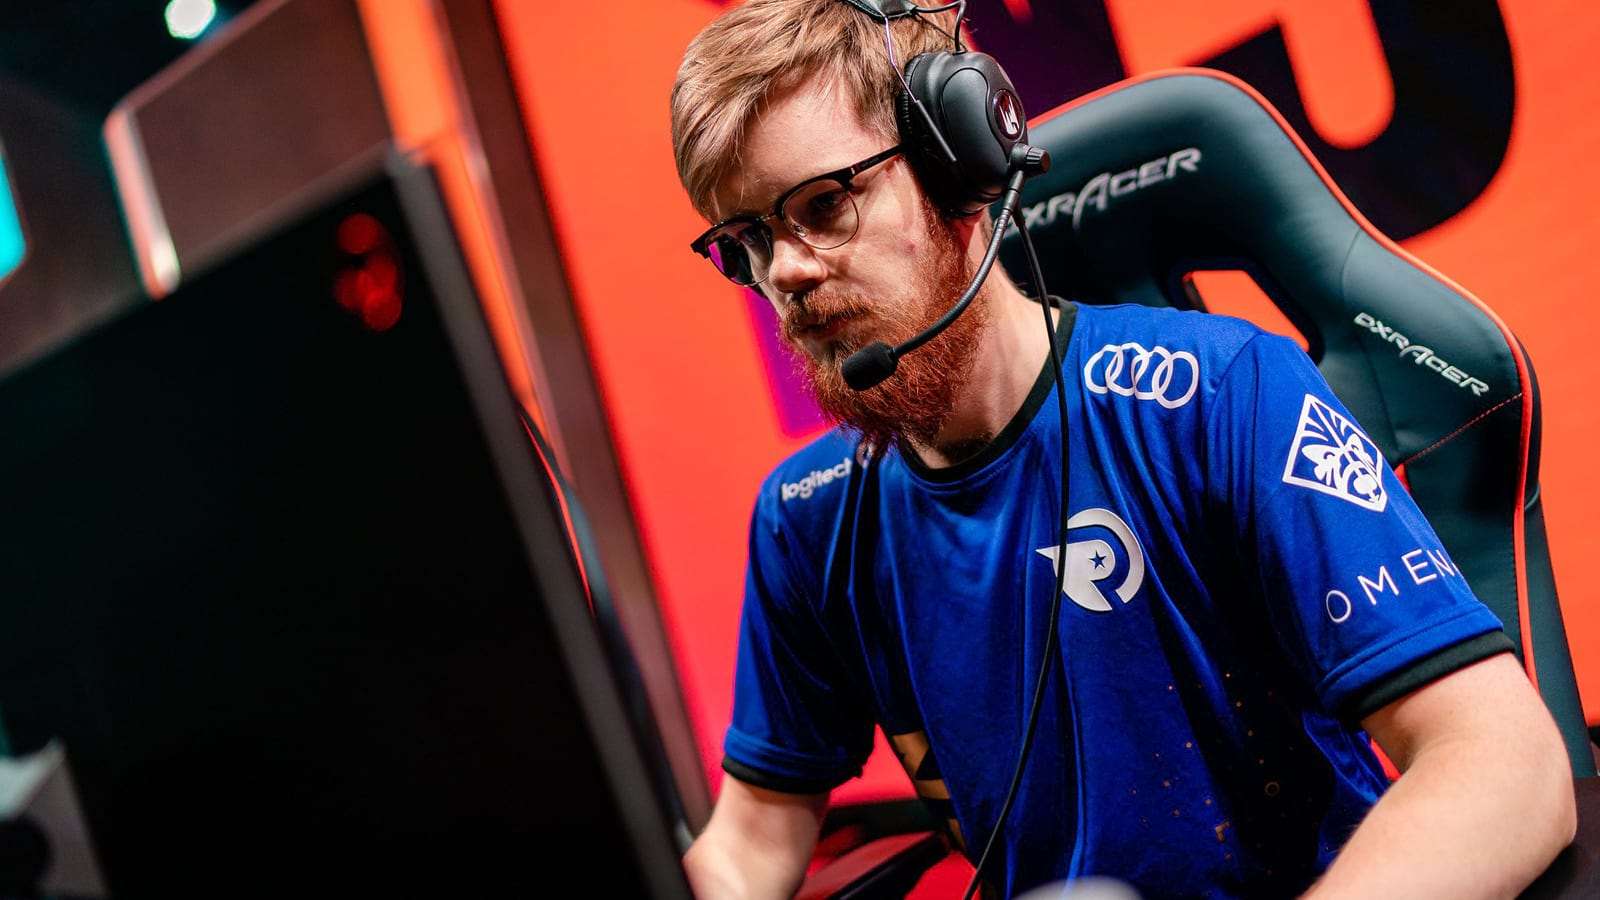 Nukeduck playing for Origen at LEC